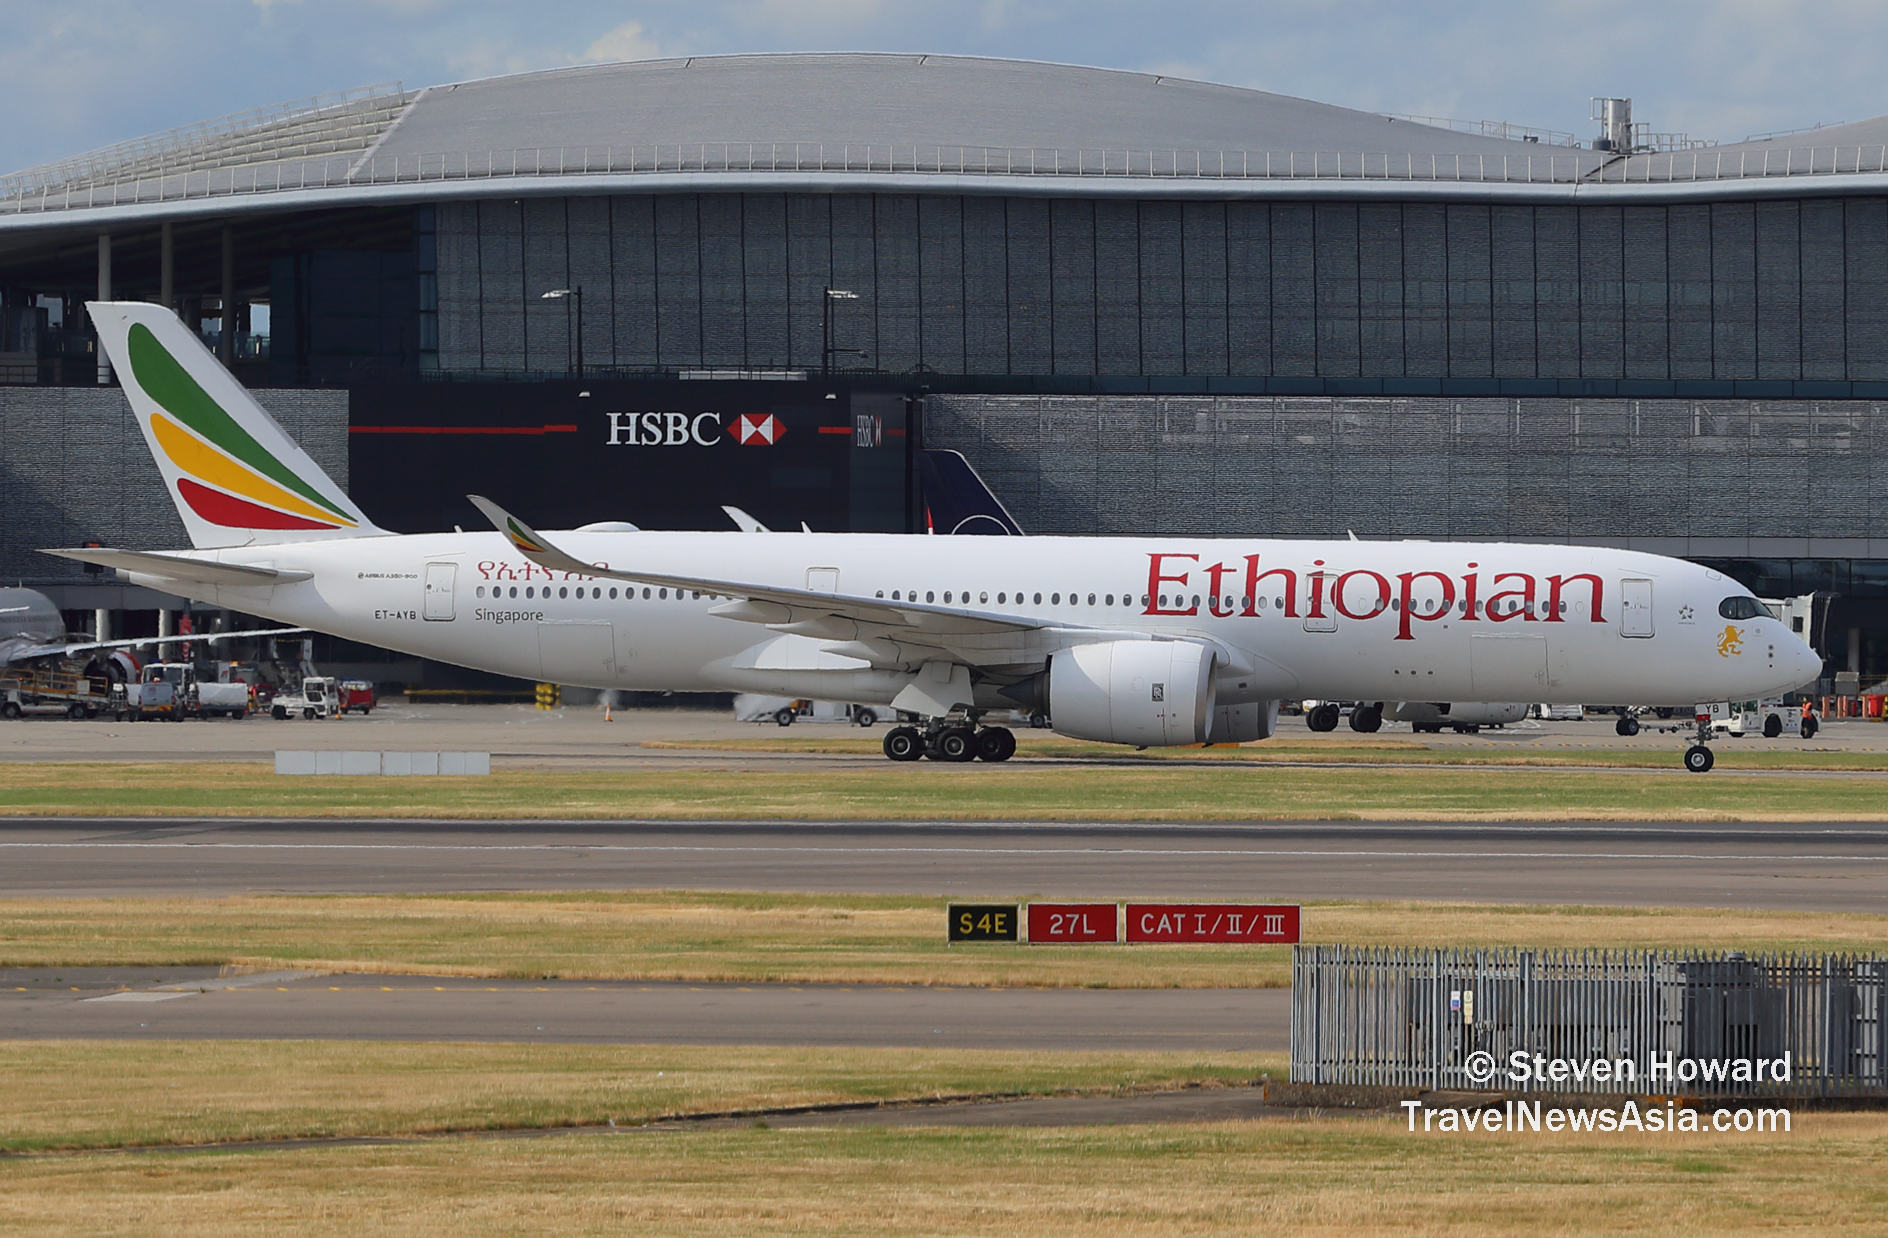 Ethiopian Airlines A350-900 reg: ET-AYB. Picture by Steven Howard of TravelNewsAsia.com Click to enlarge.